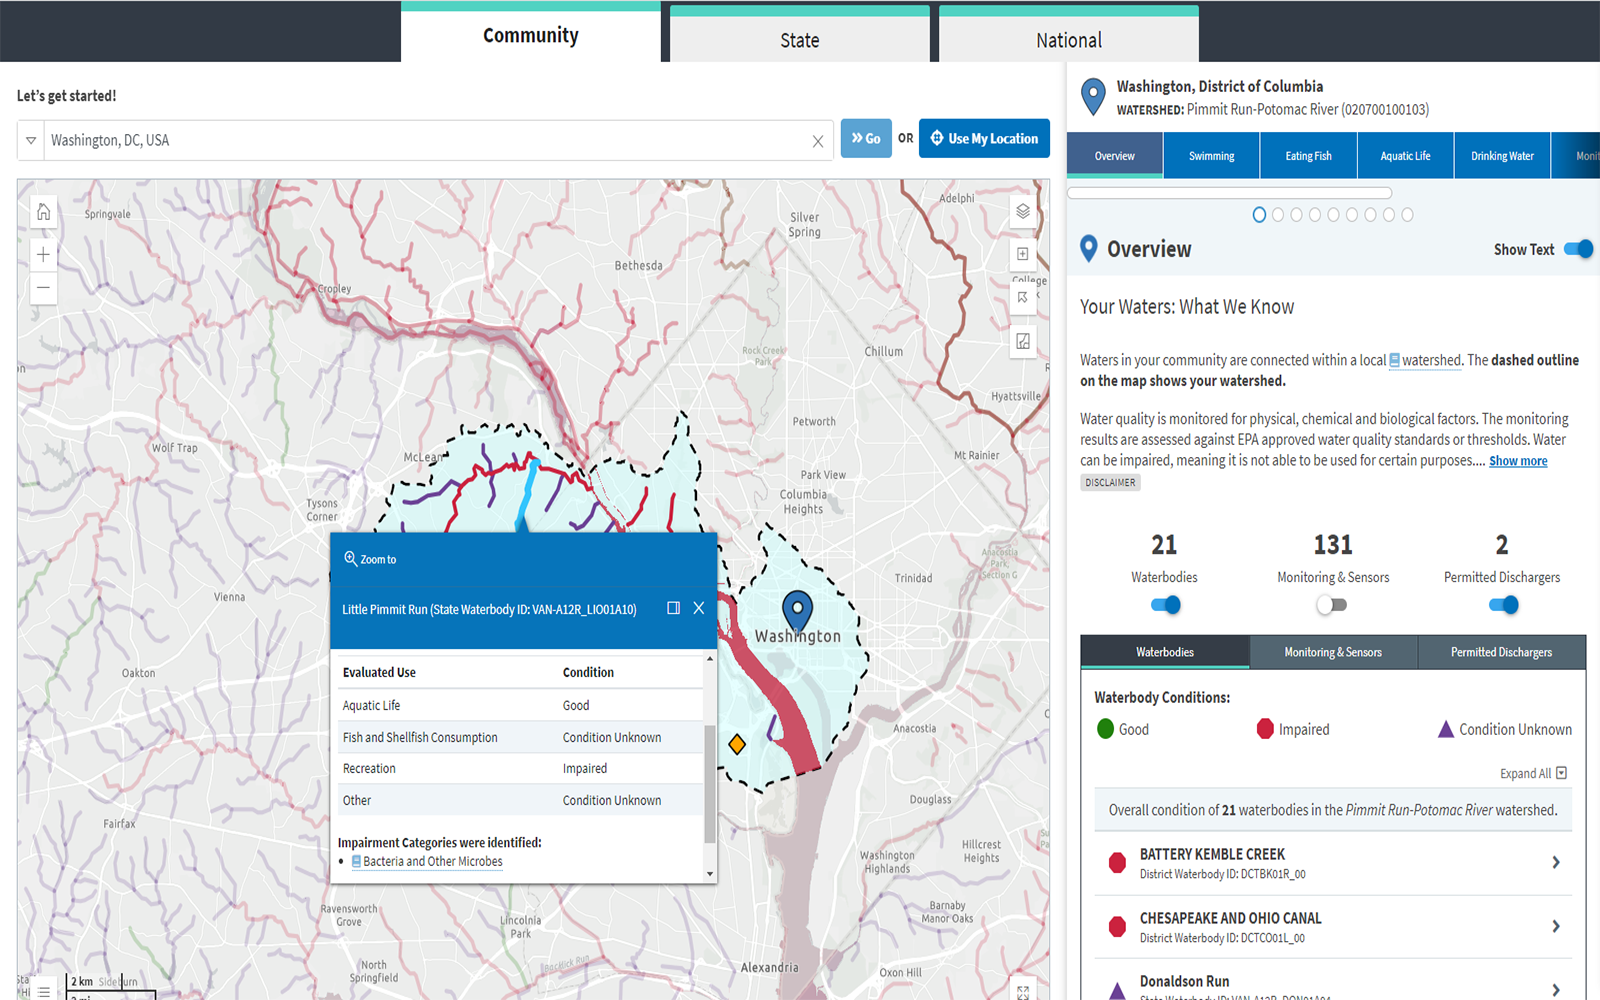 The How's My Waterway tool open on a browser, showing a map of a watershed and listing the water conditions in a window next to the map.